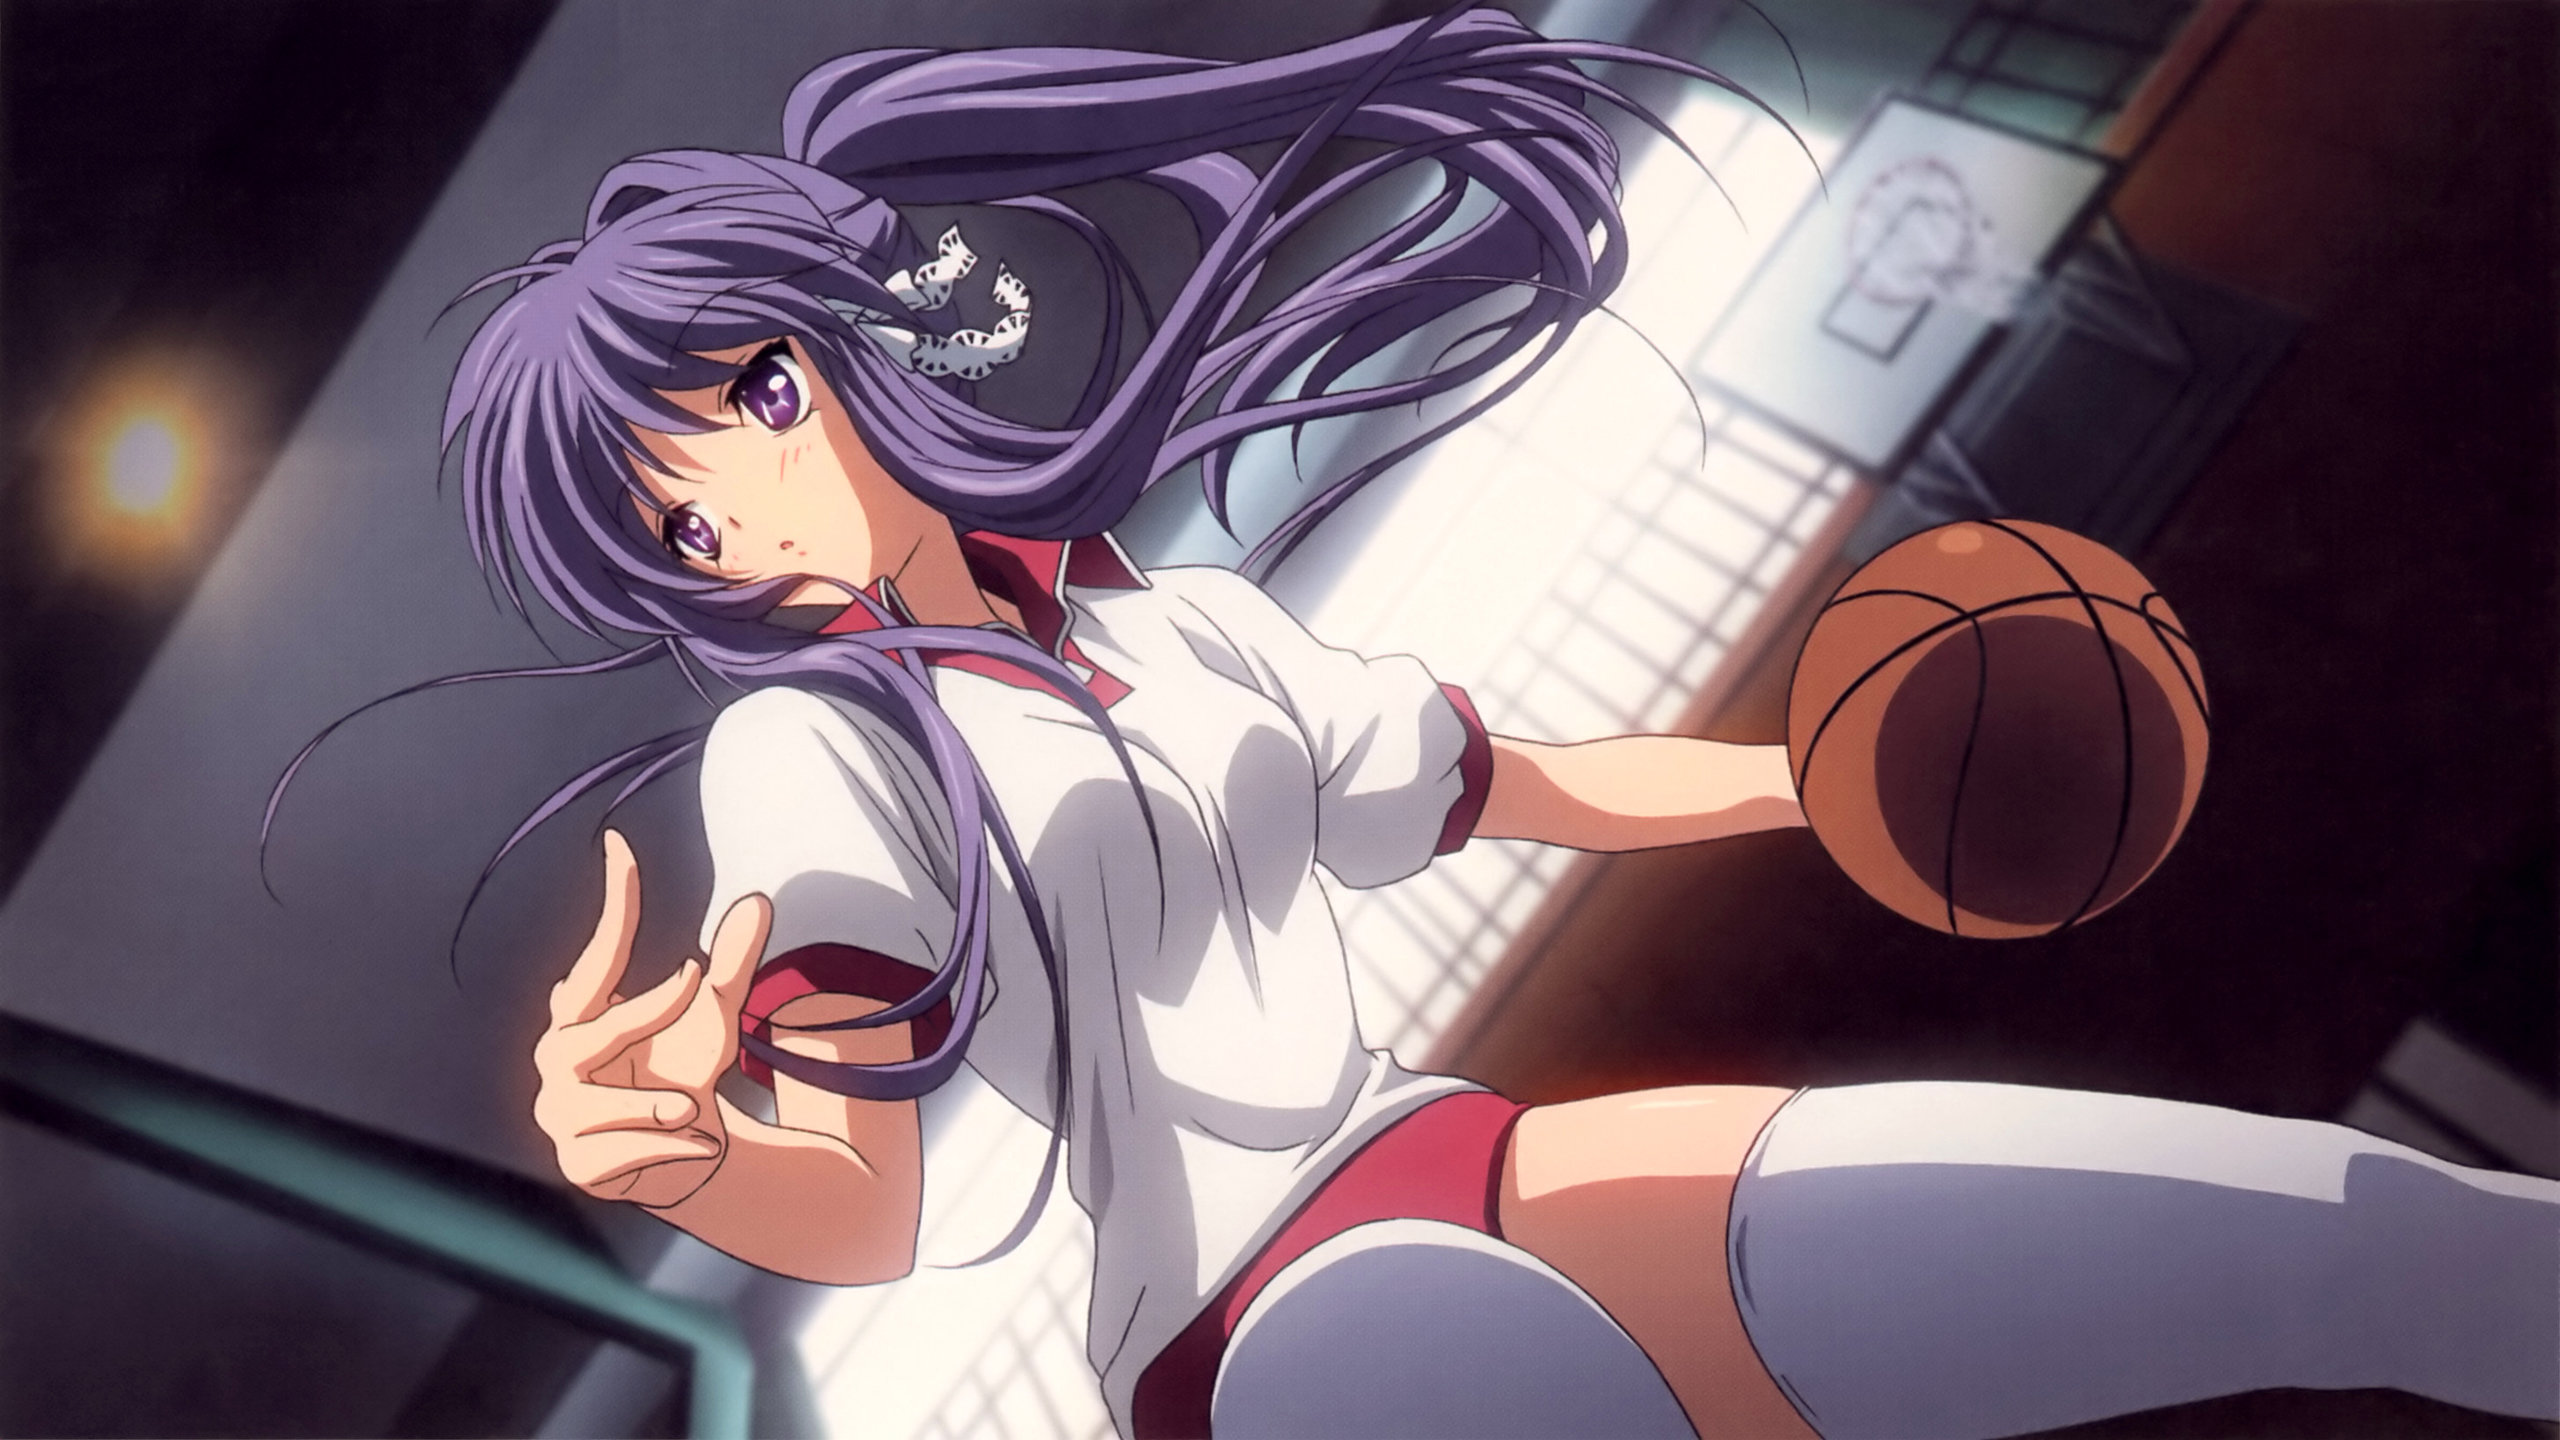 Clannad HD Backgrounds for 2560x1440 desktop.